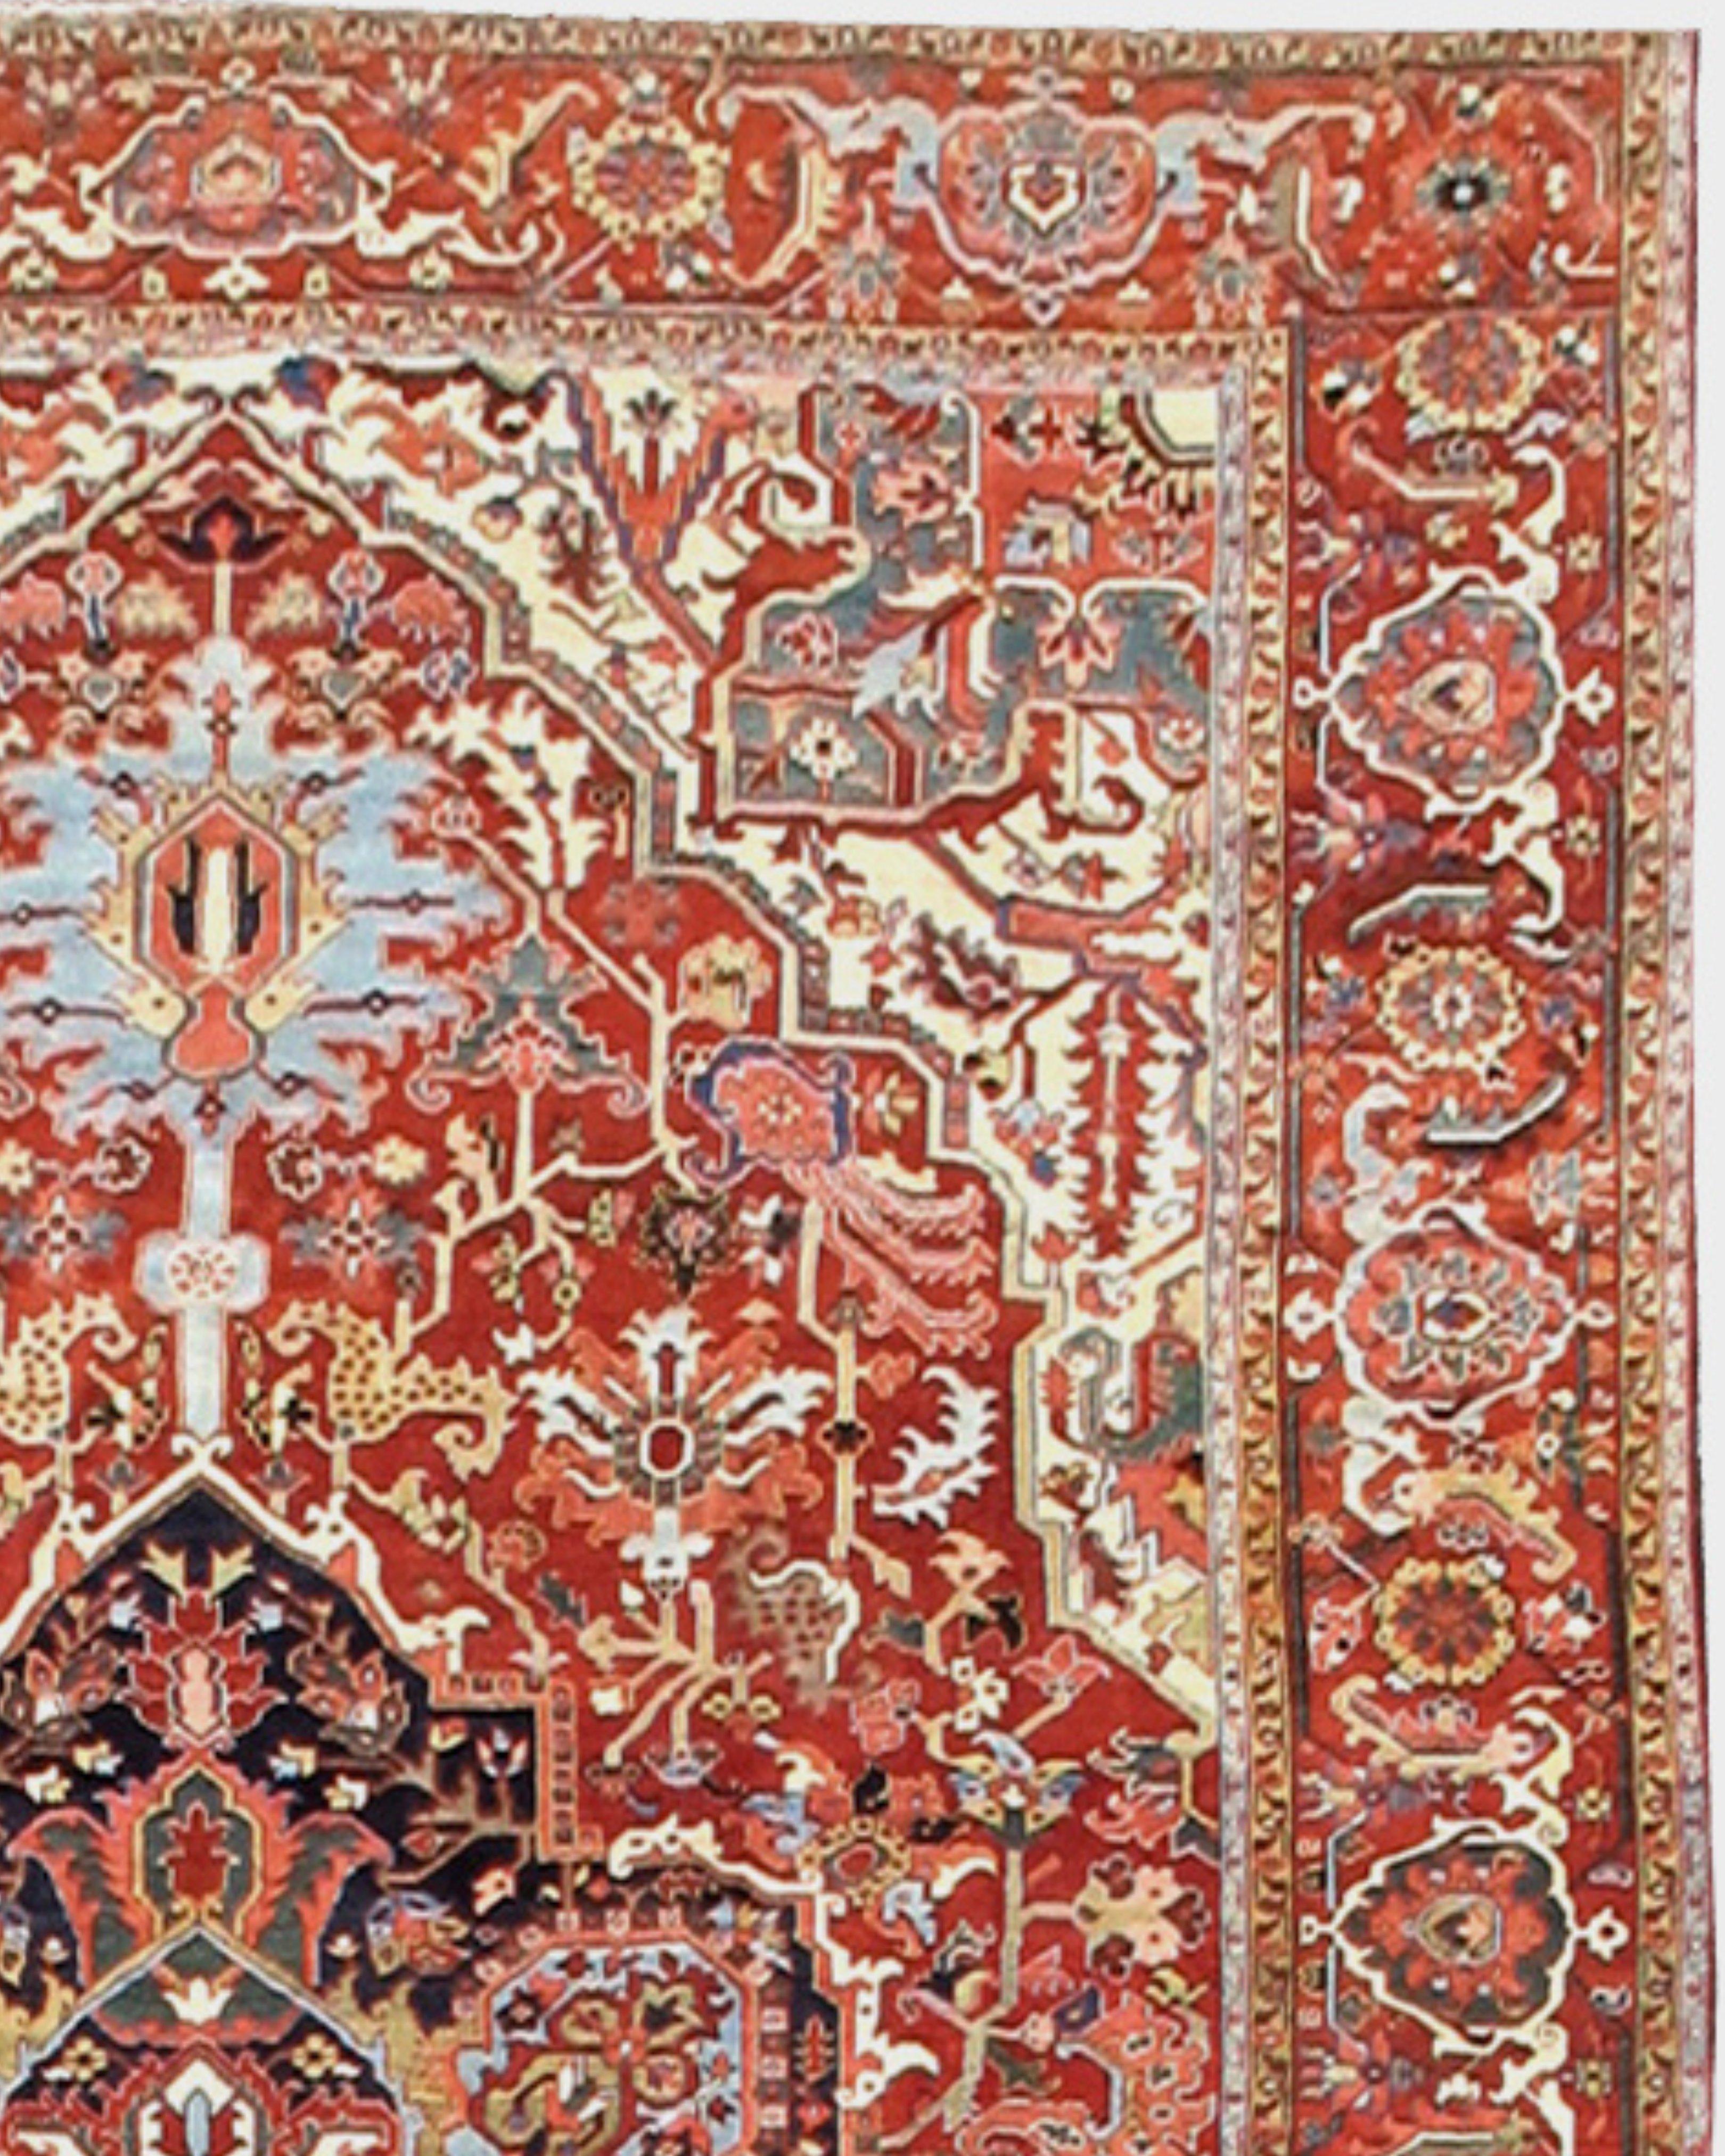 Antique Large Persian Heriz Carpet, Early 20th Century

Heriz rugs and carpets were woven in Northwest Persia starting in the Mid-19th Century in response to a great increase in demand for rugs internationally. Prior to that, there were no rugs